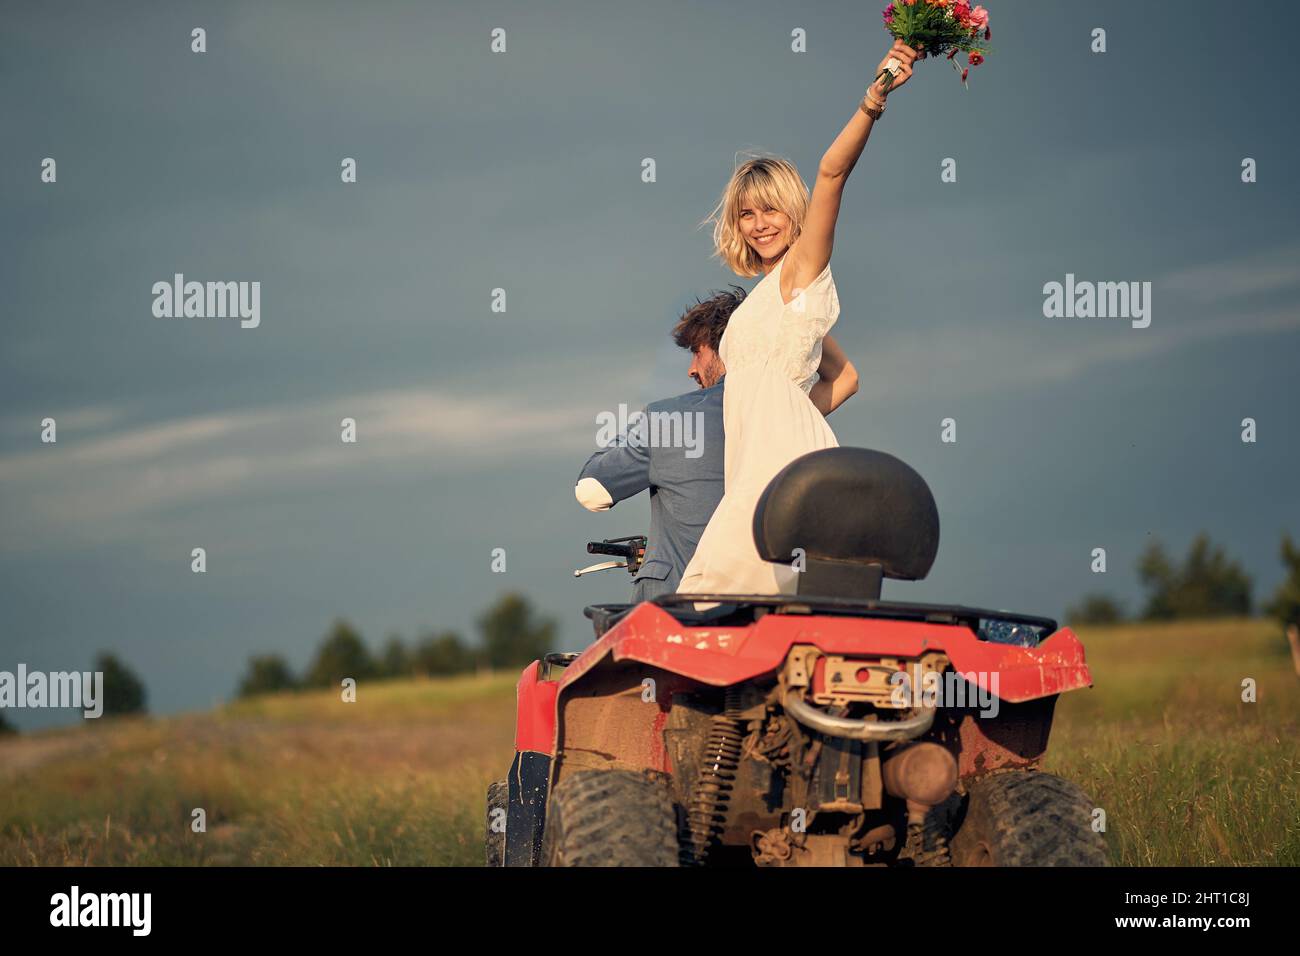 Joyful bride with bridal bouquet. Newlywed couple riding quad. Love, marriage, wedding, happiness, couple concept. Stock Photo